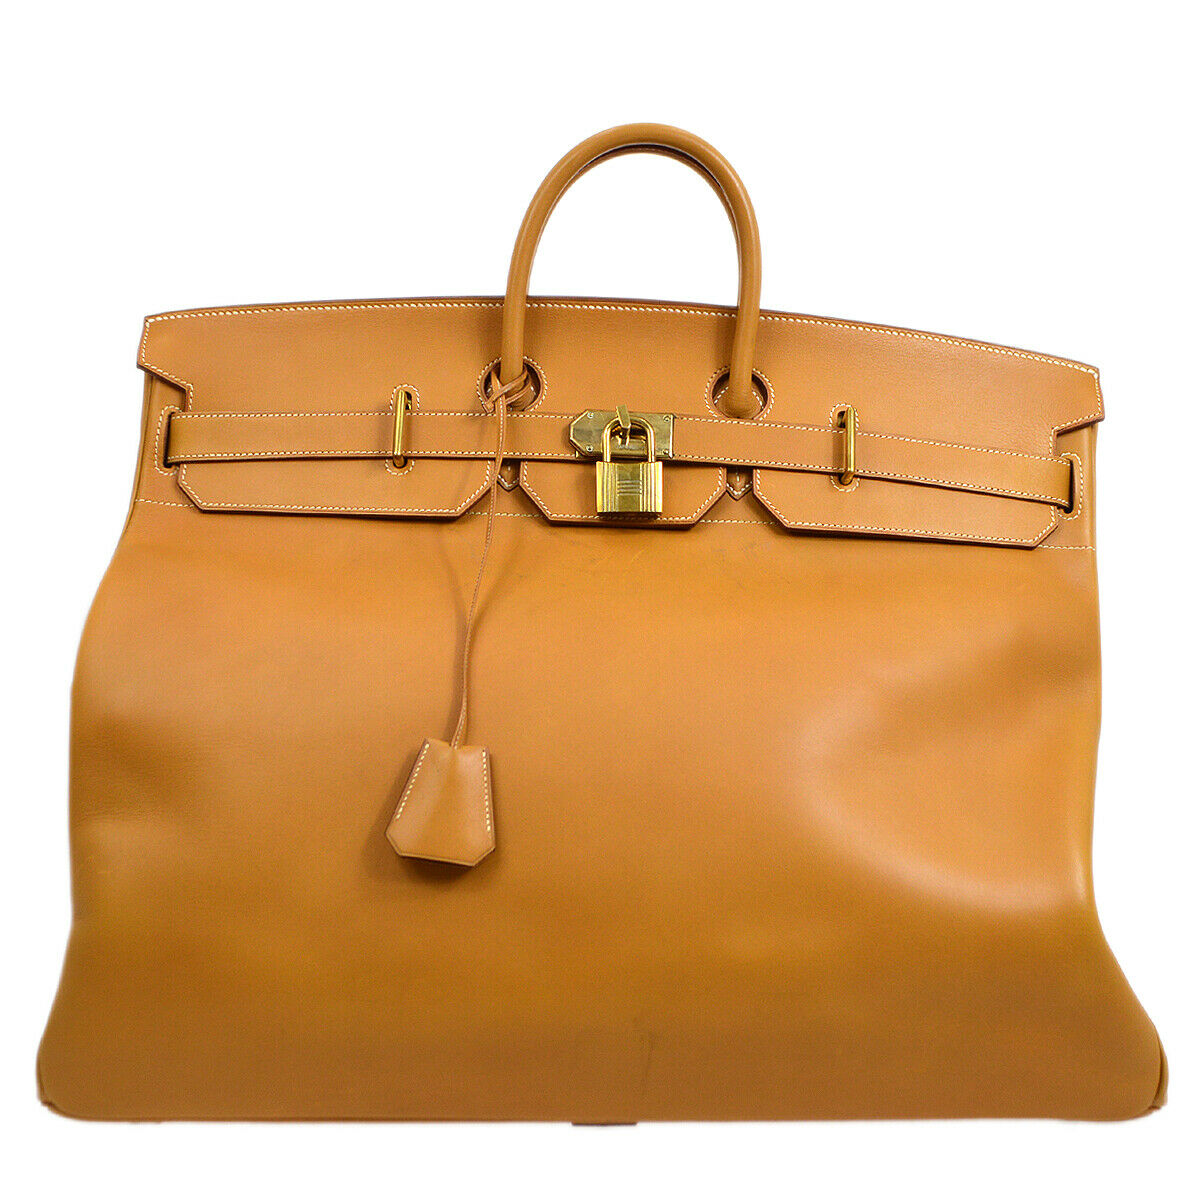 HERMES HAC 55 - aptiques by Authentic PreOwned